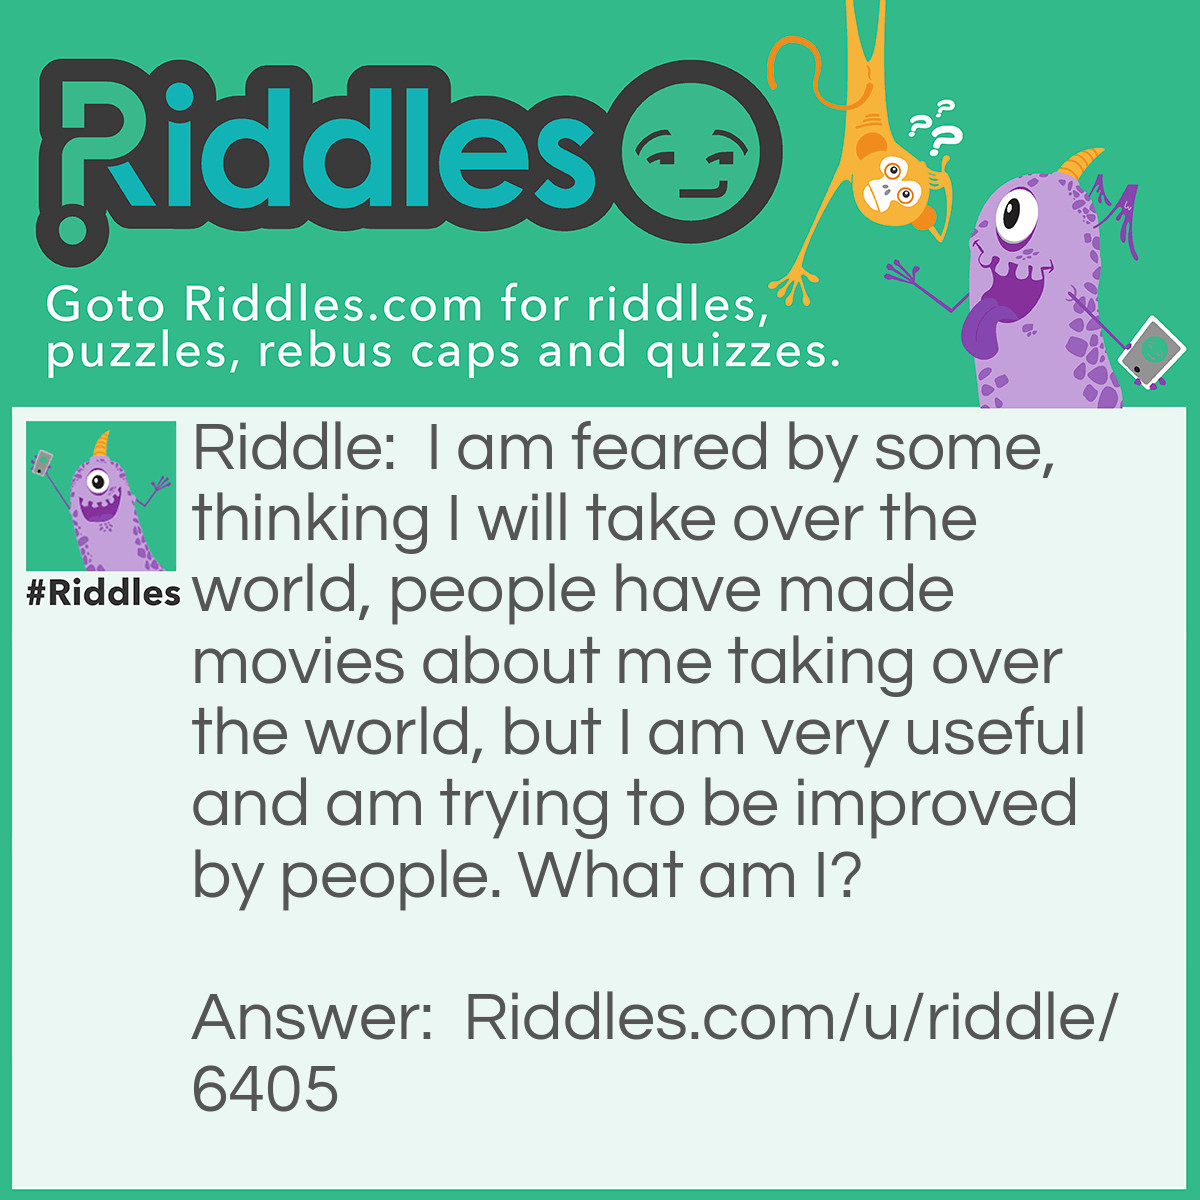 Riddle: I am feared by some, thinking I will take over the world, people have made movies about me taking over the world, but I am very useful and am trying to be improved by people. What am I? Answer: Robots.